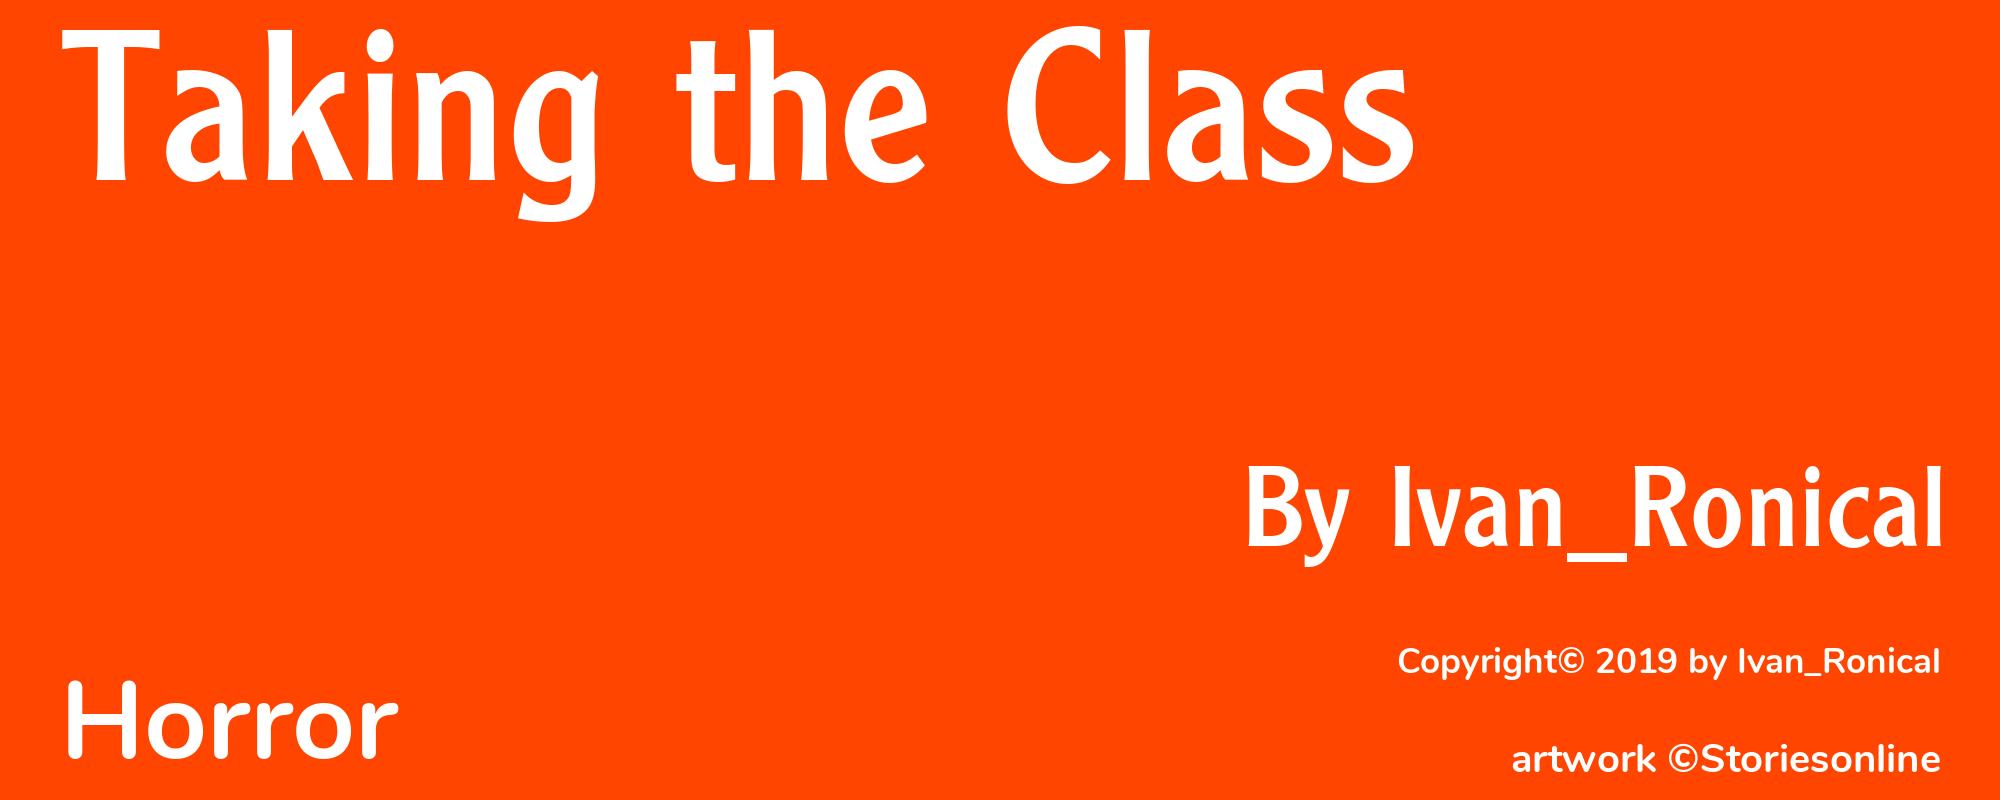 Taking the Class - Cover